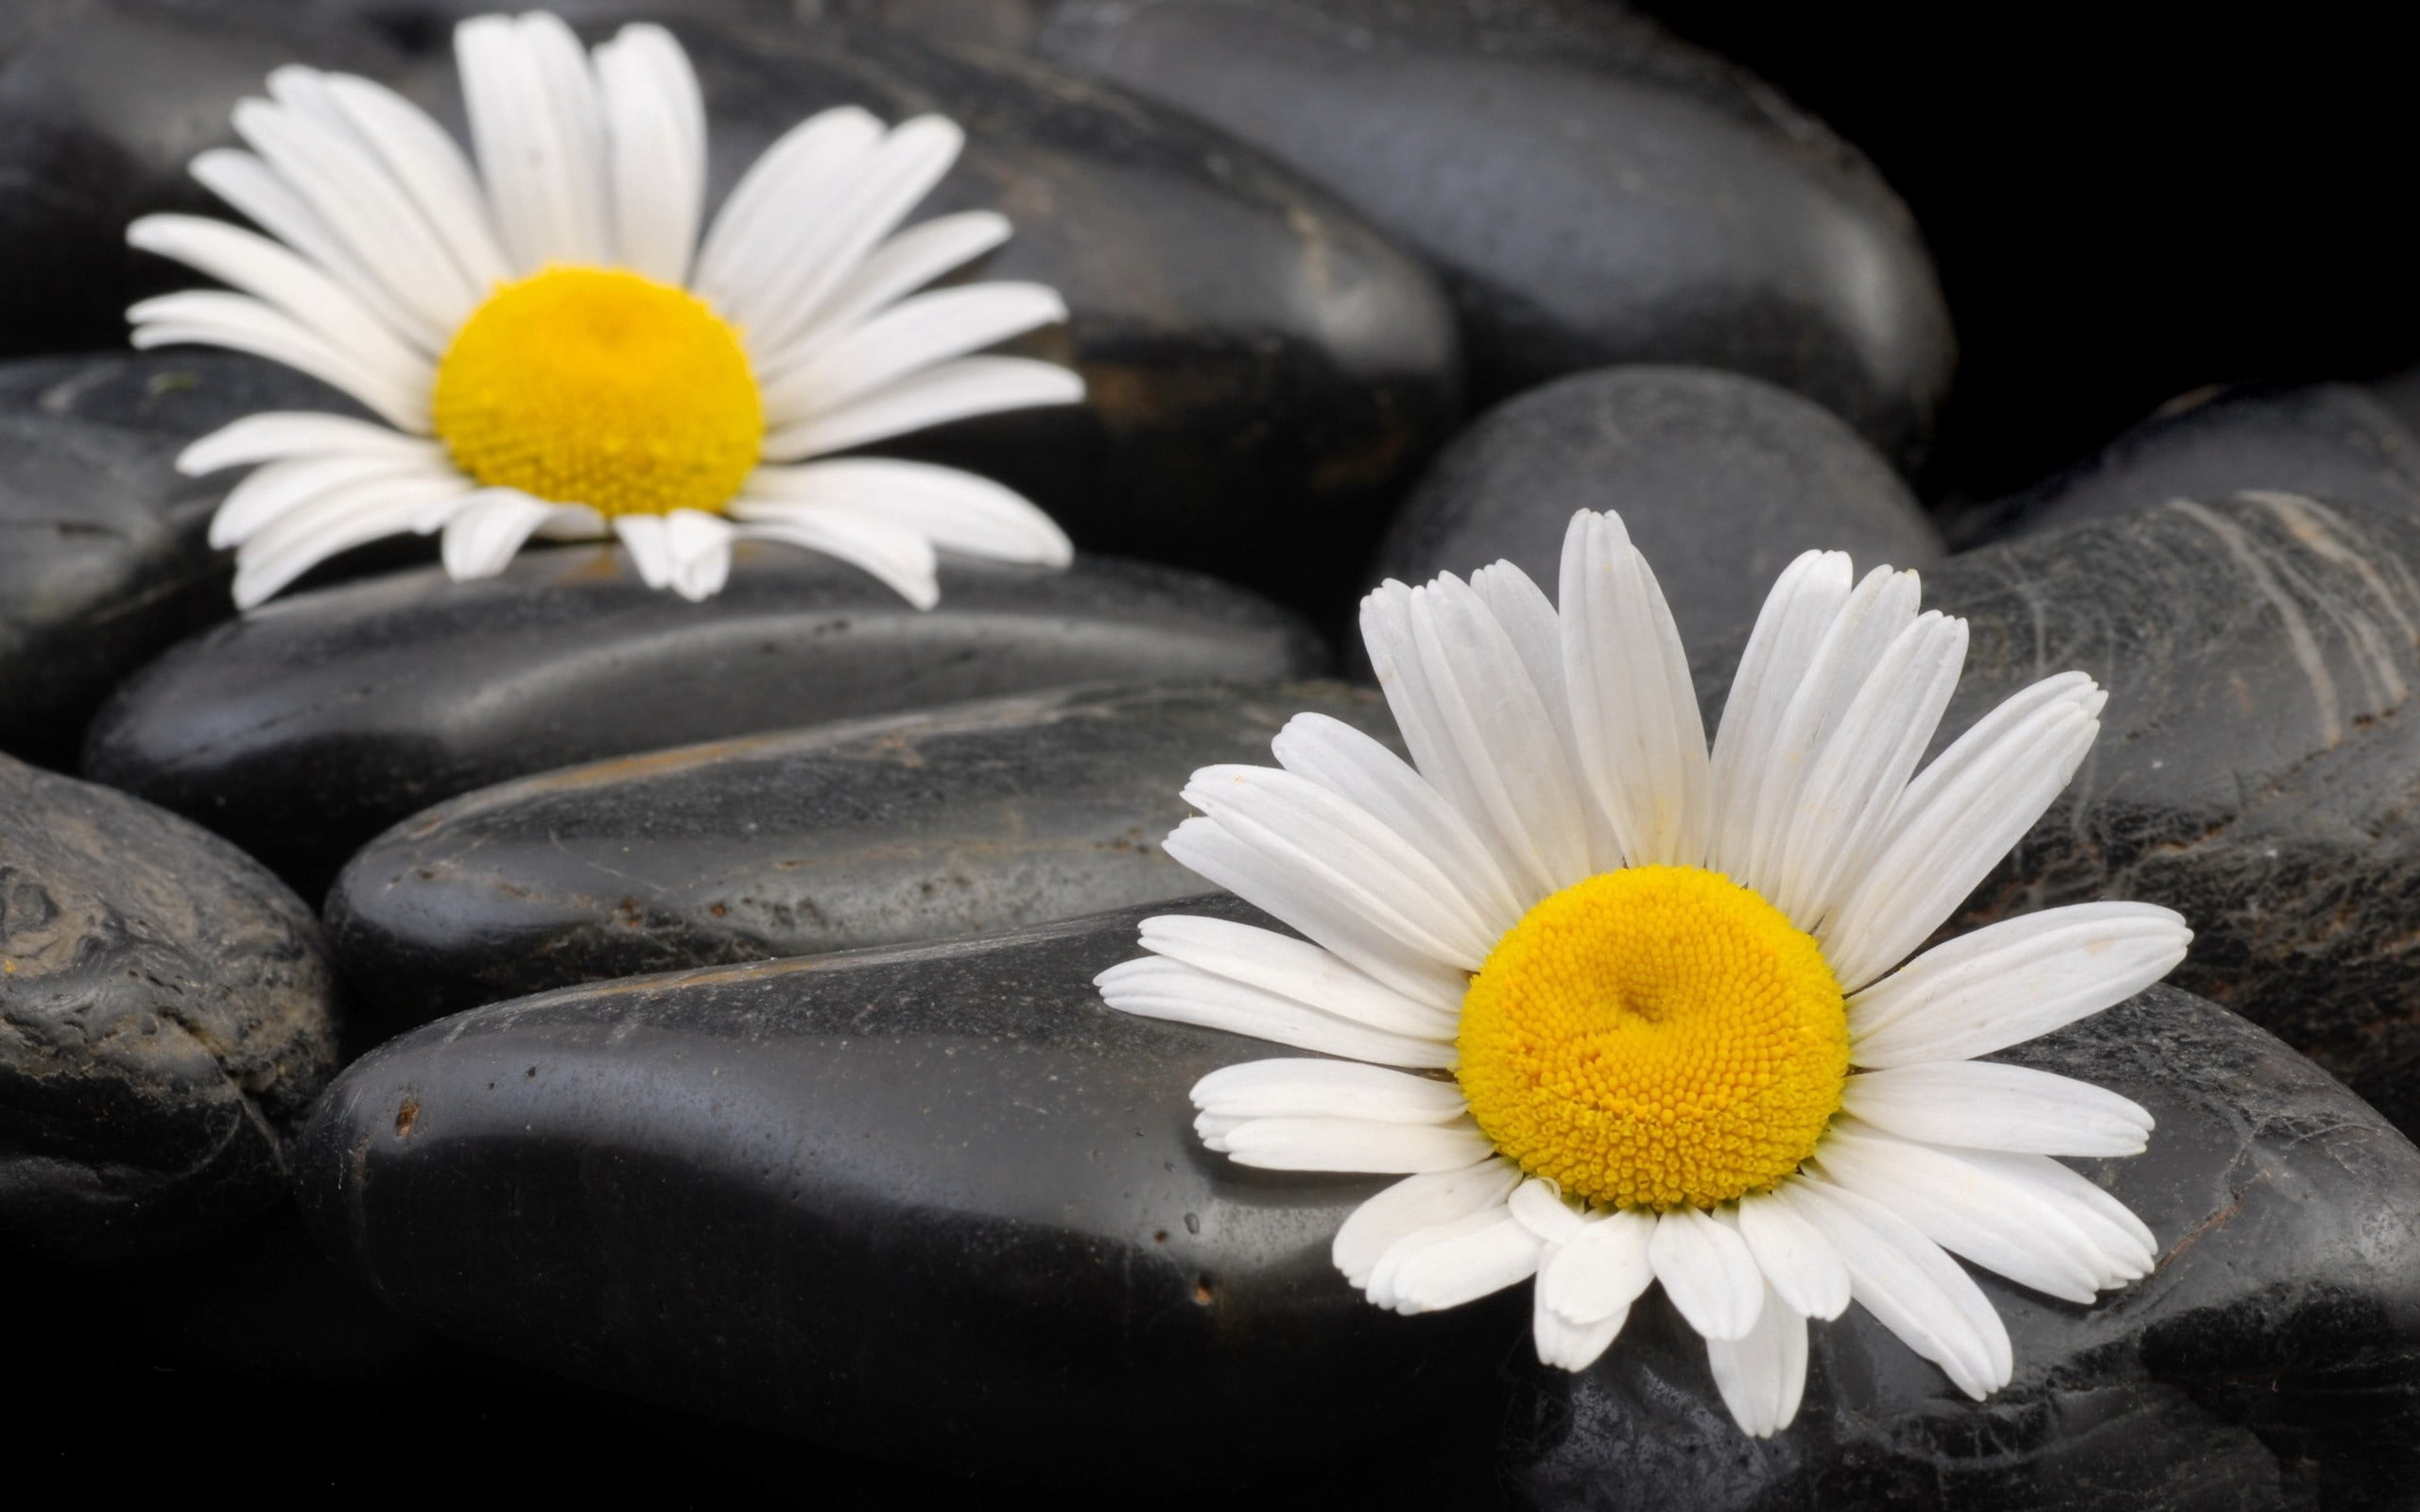 two white common daisy flowers, couple, stones, daisies, petals